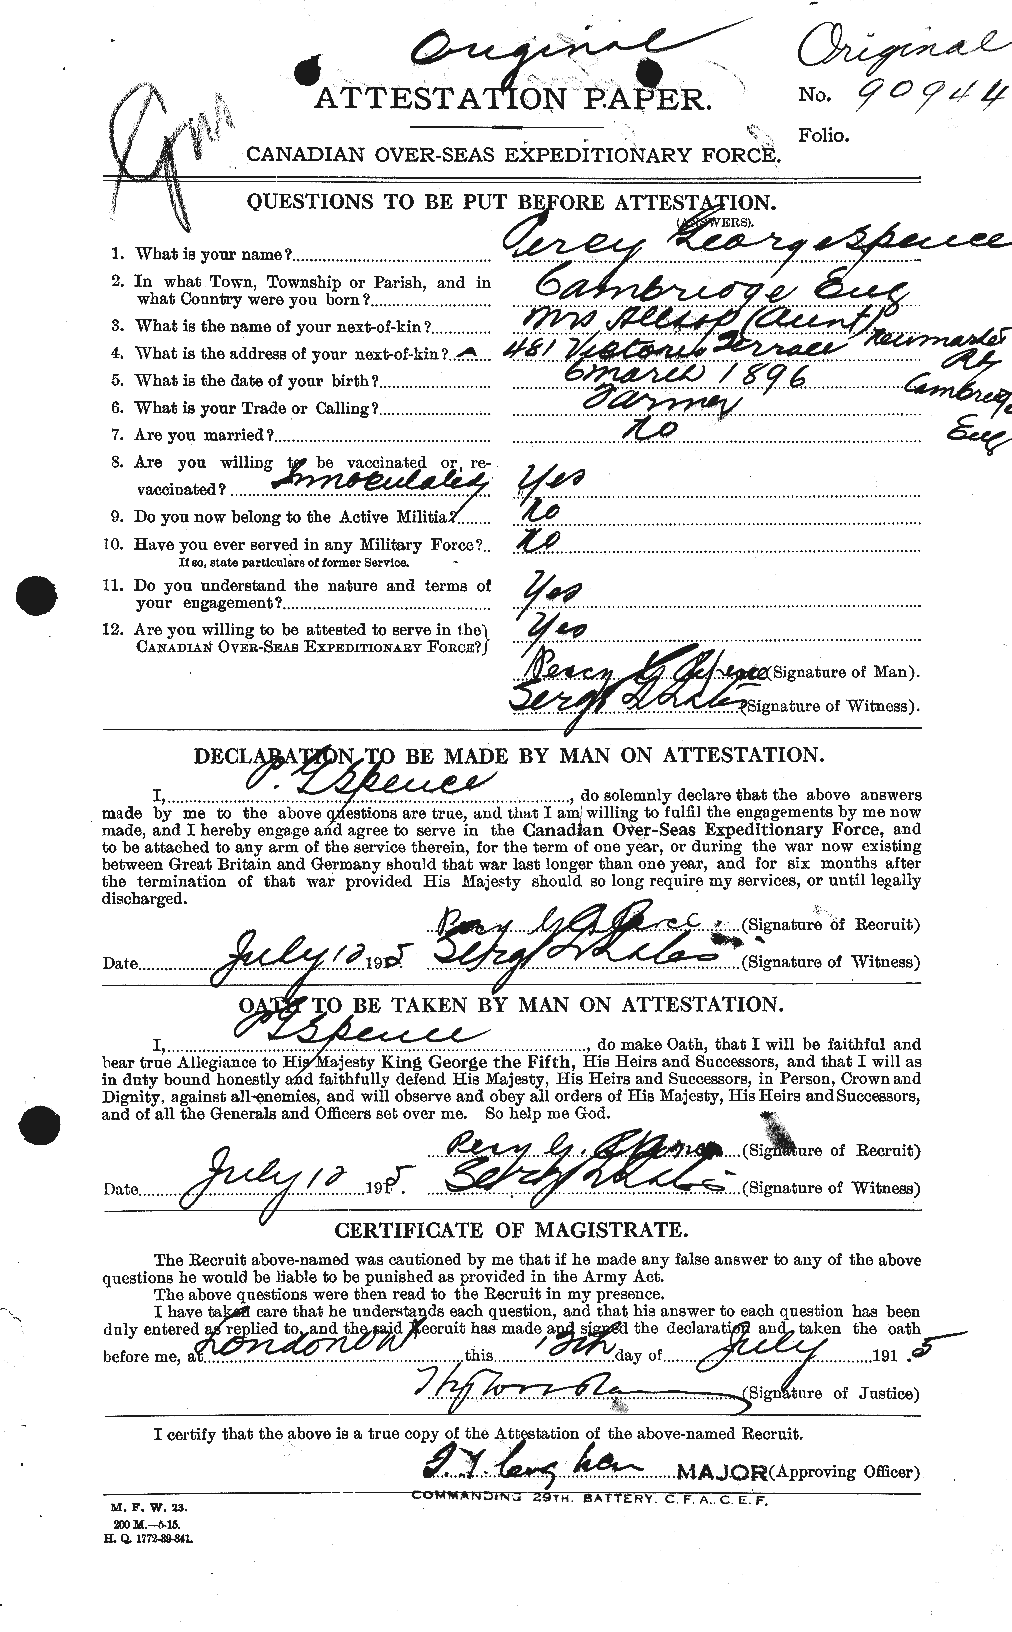 Personnel Records of the First World War - CEF 621403a